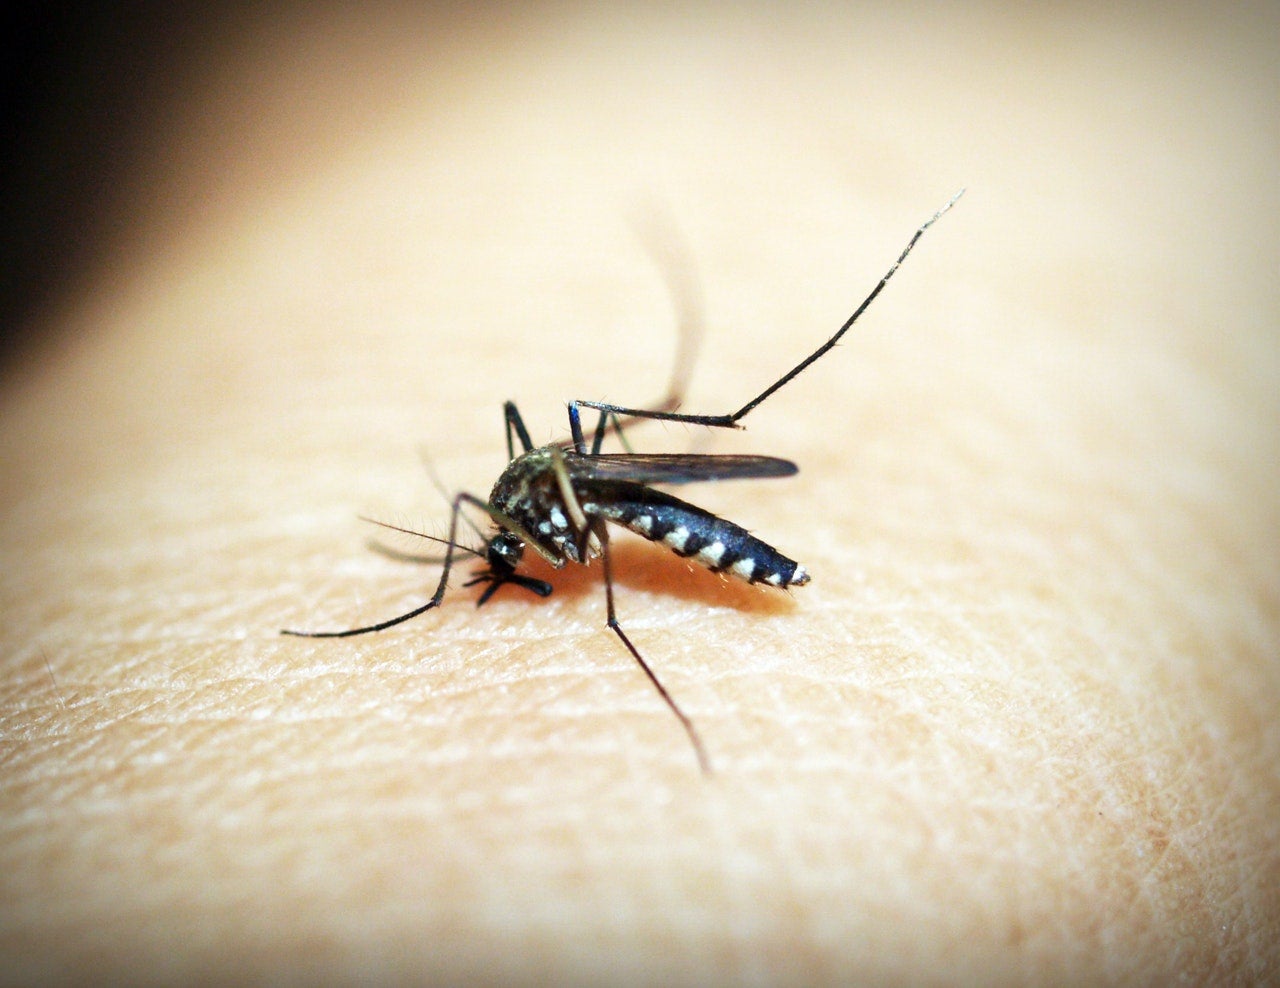 Close-up of mosquito on human skin.